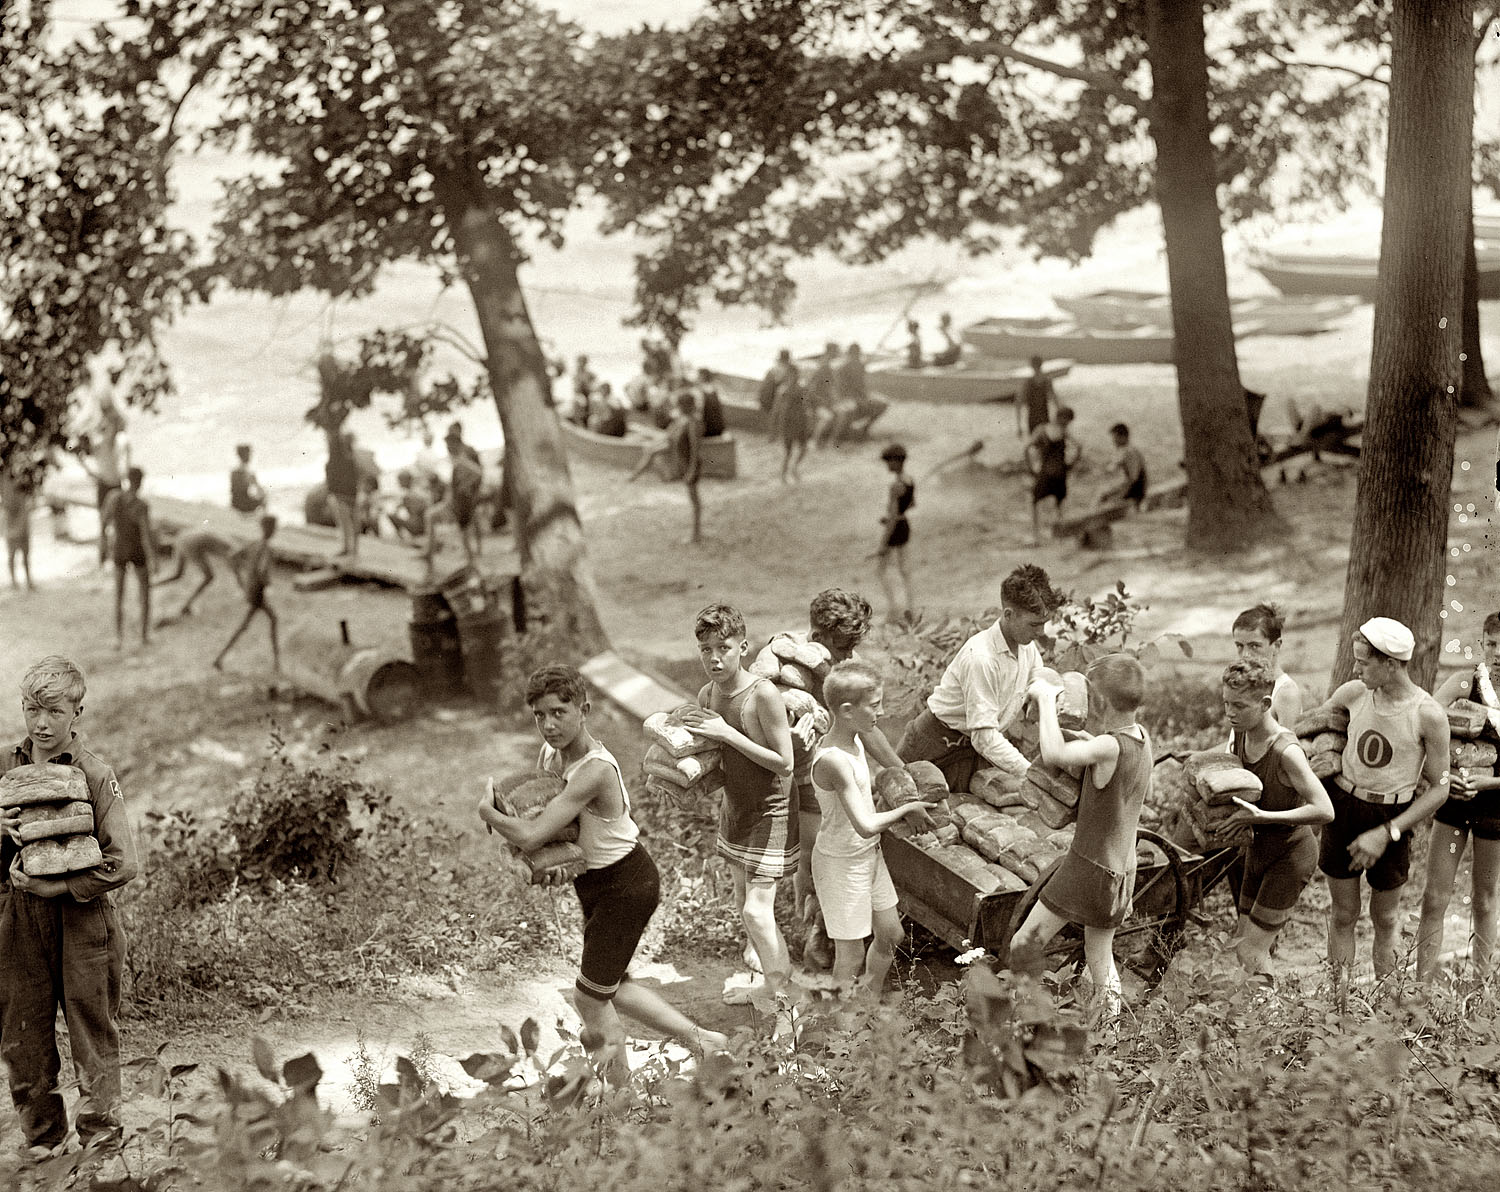 Summer 1923. Vicinity of Washington, D.C. "Boys carrying loaves of bread from wagons near beach." View full size. National Photo Company Collection.